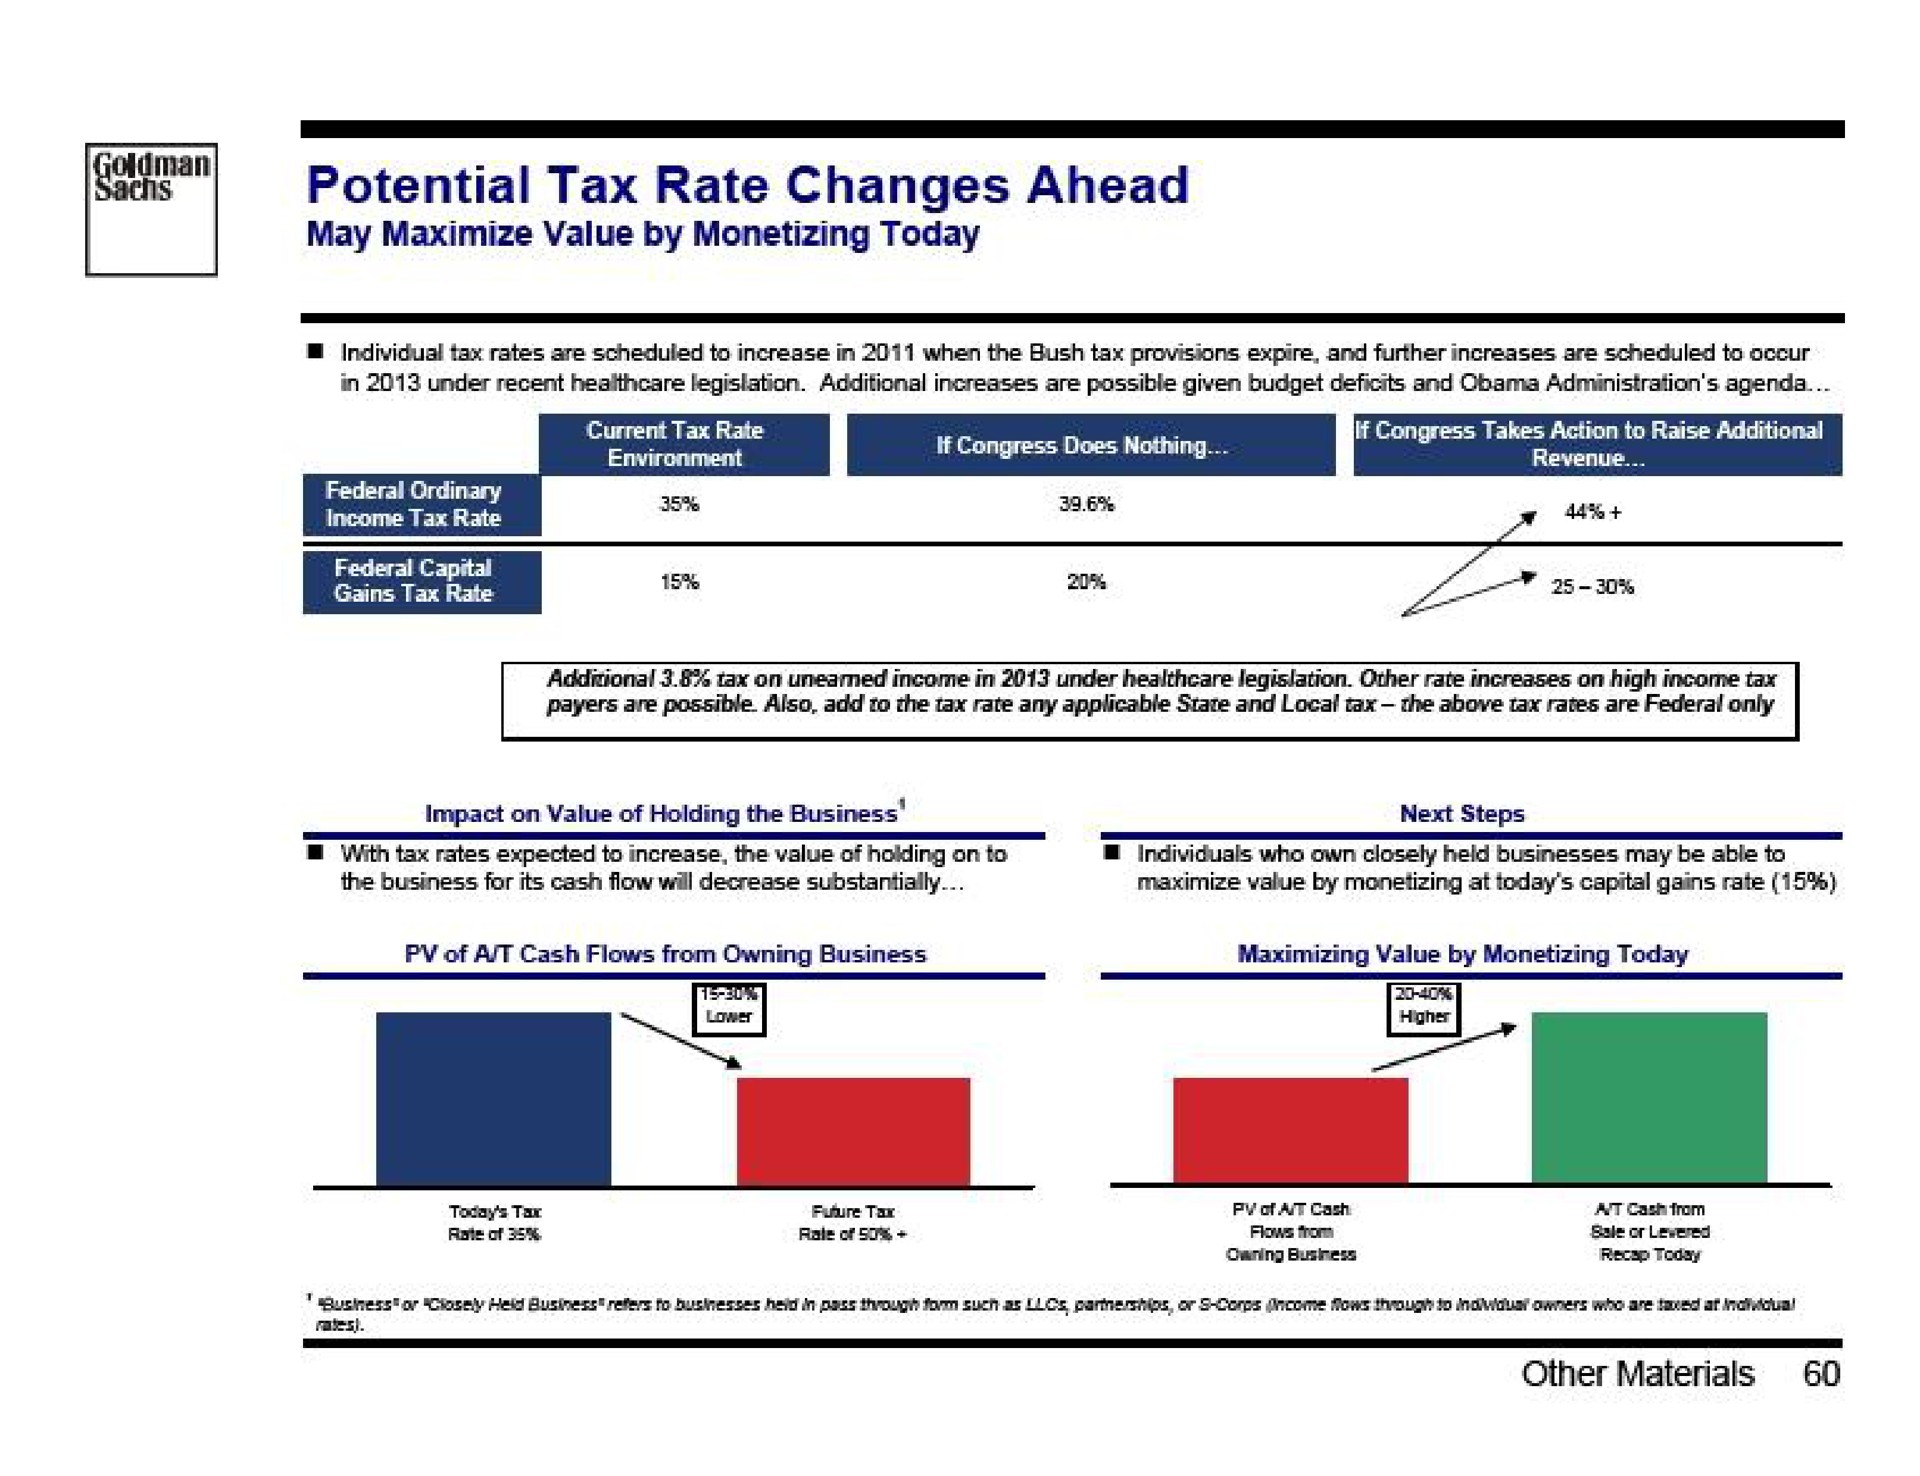 potential tax rate changes ahead | Goldman Sachs